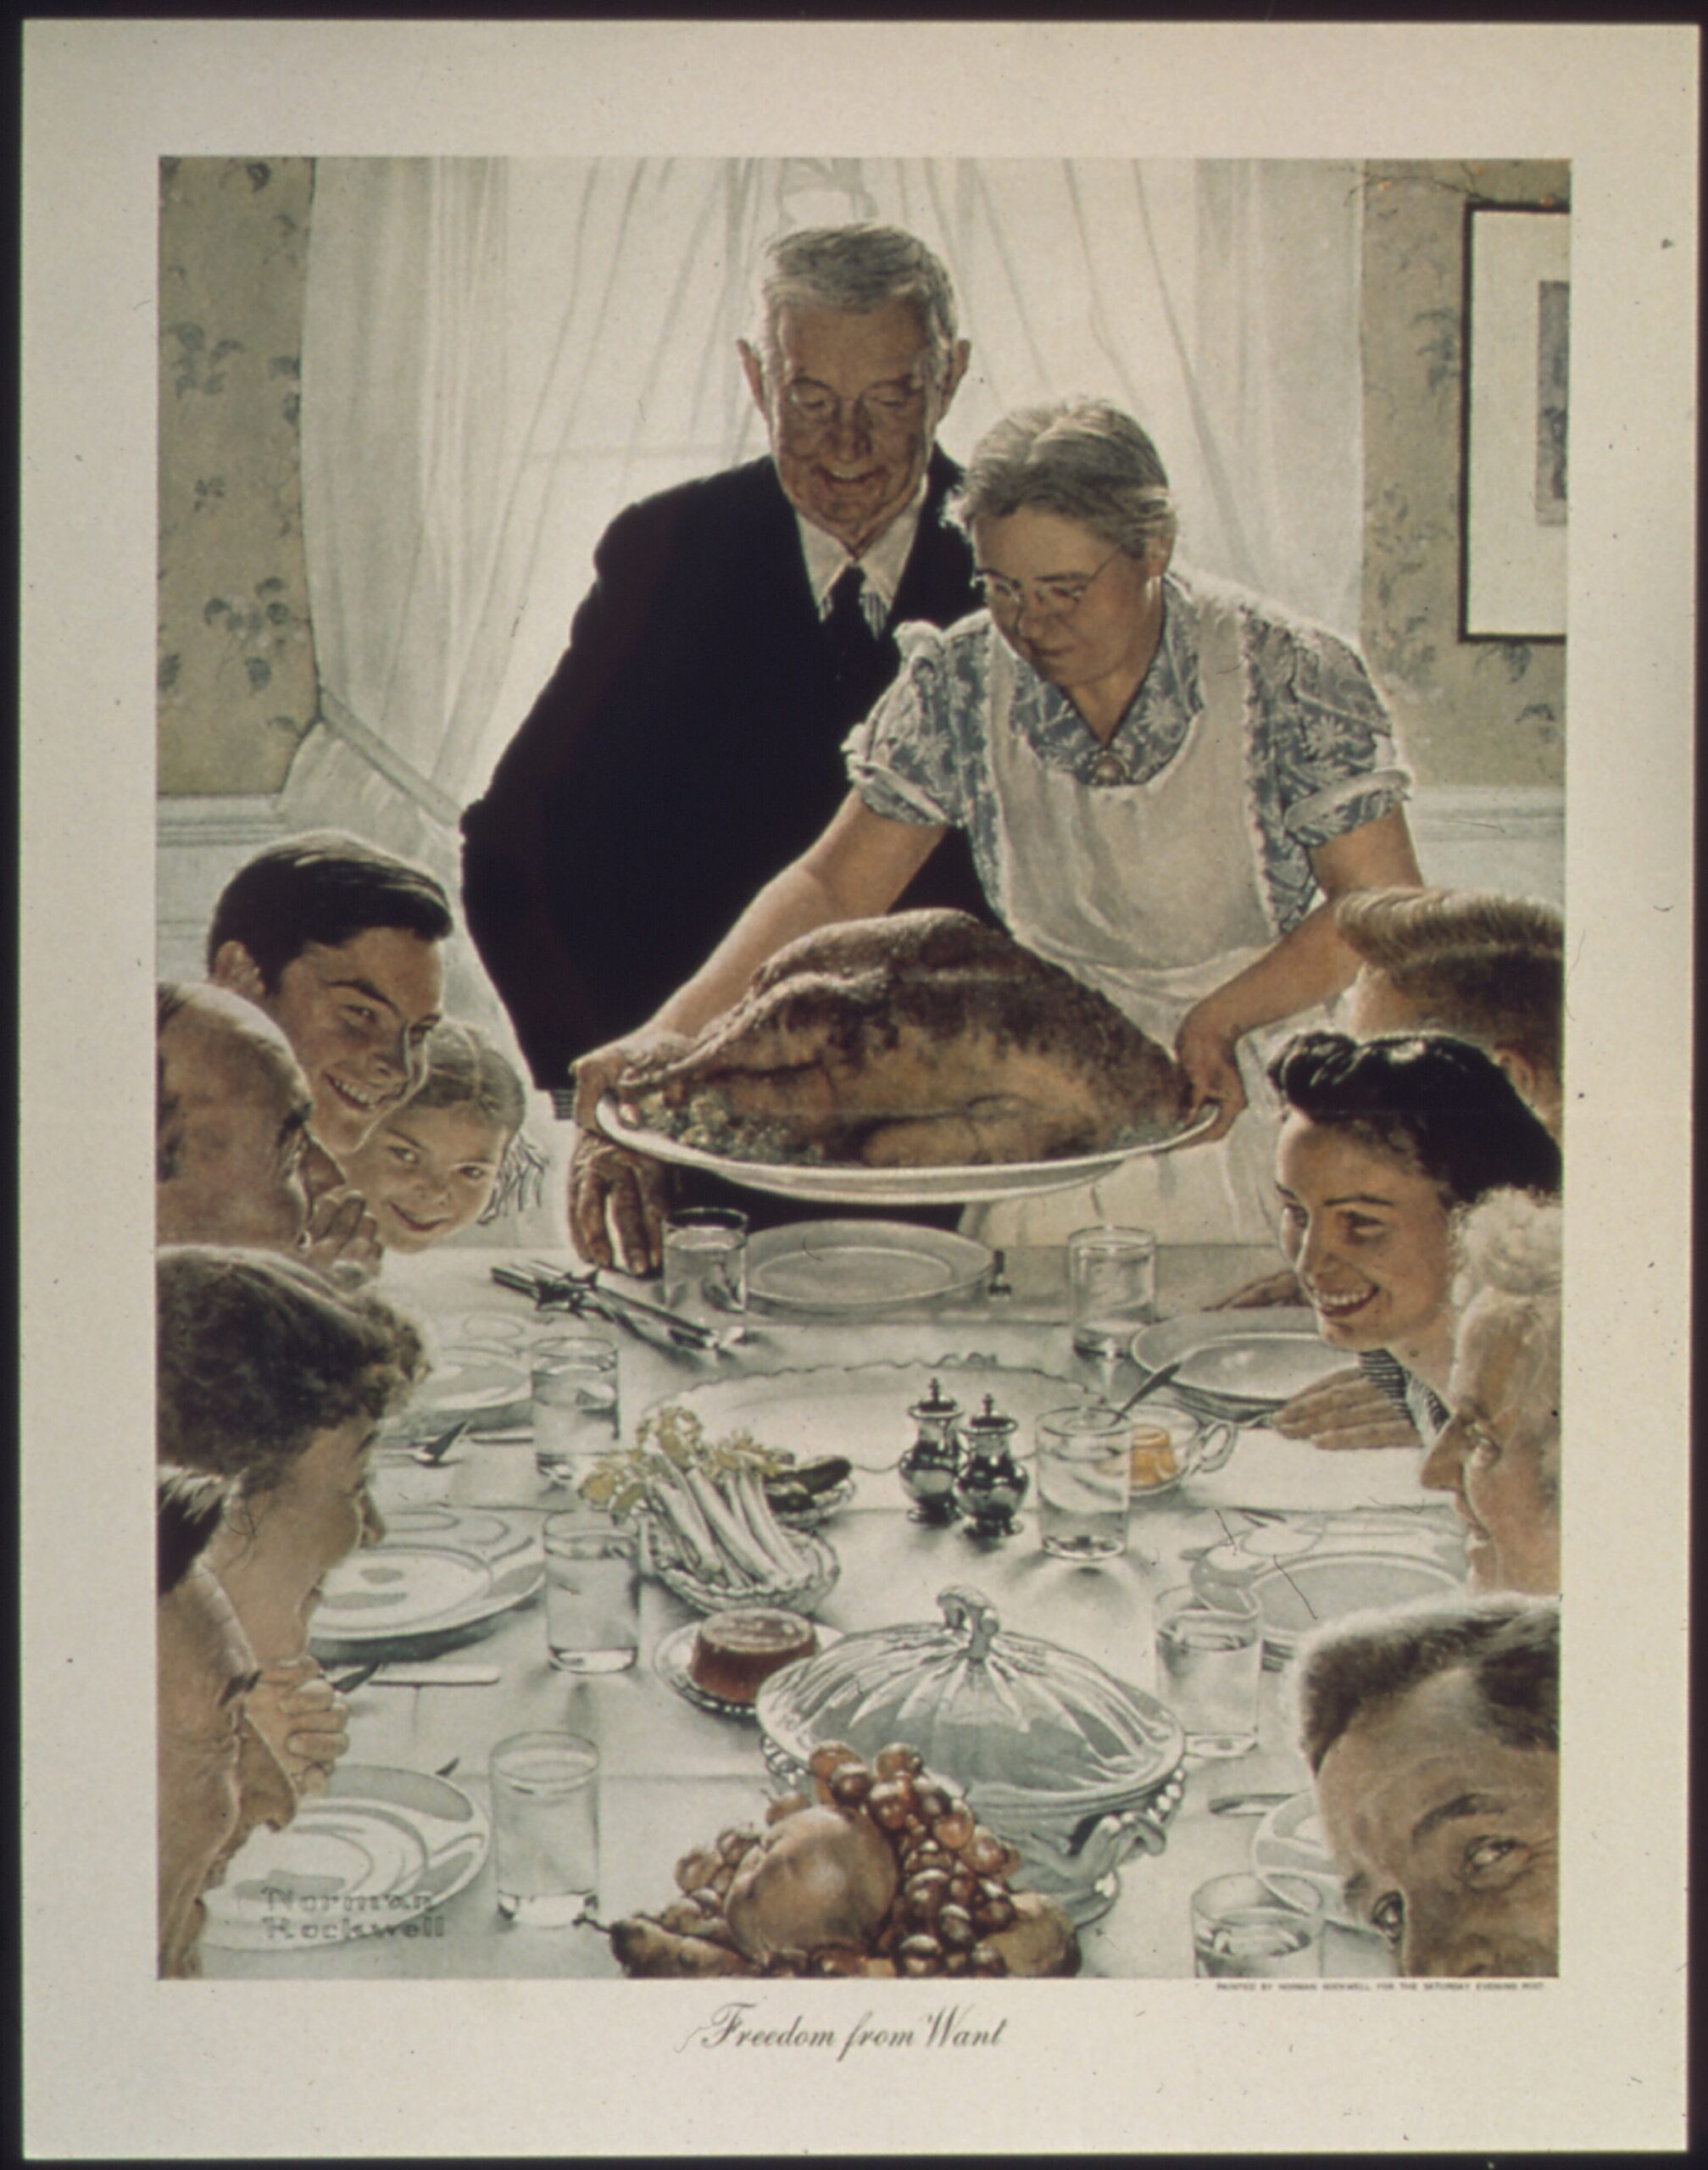 Freedom from Want - Norman Rockwell